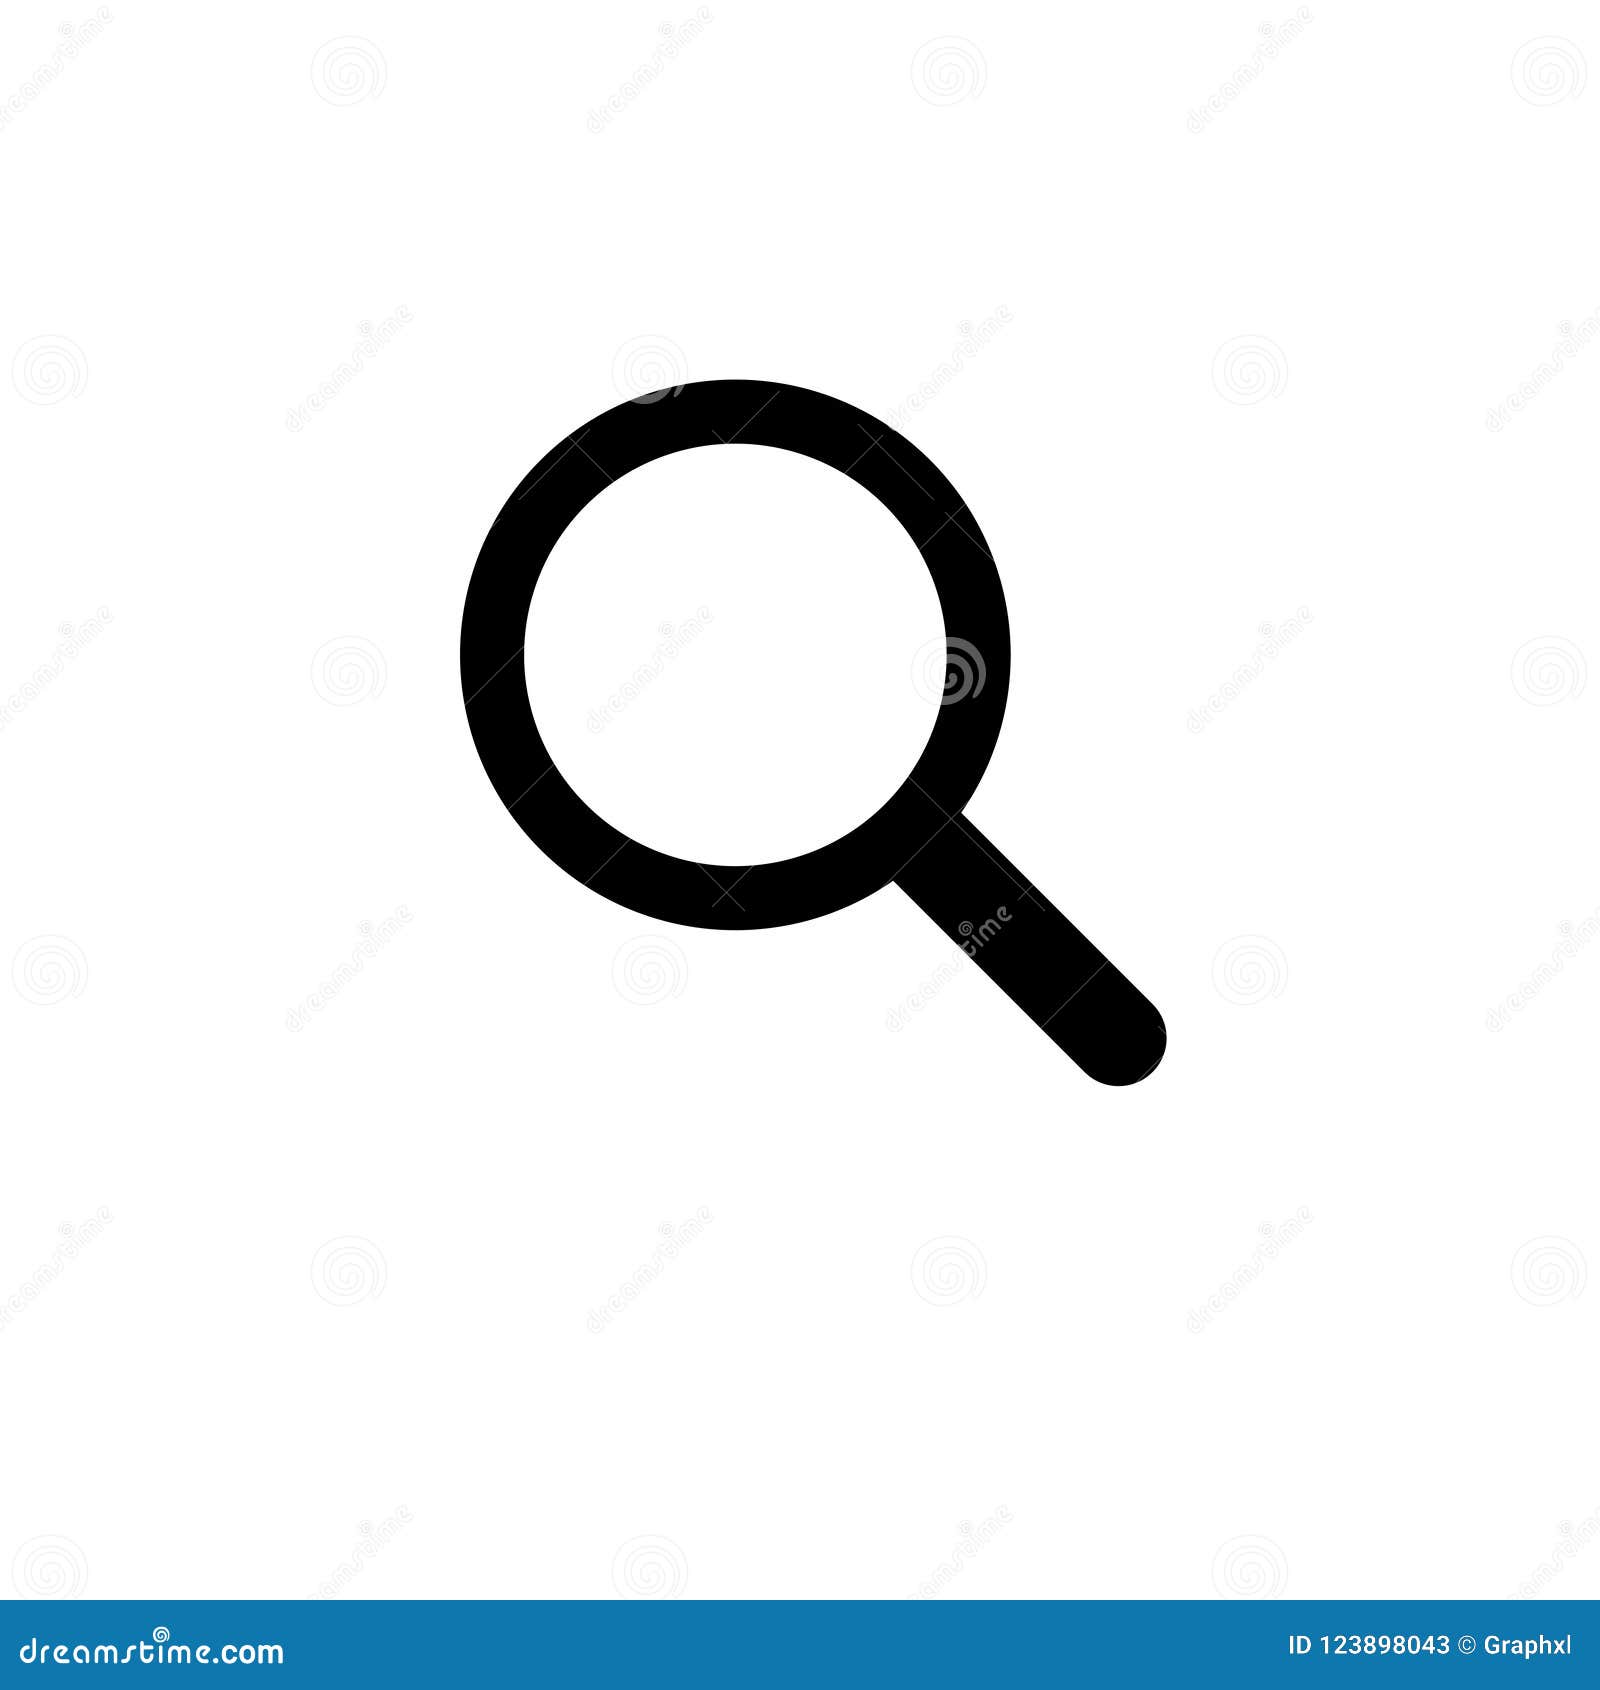 magnifying glass or search icon